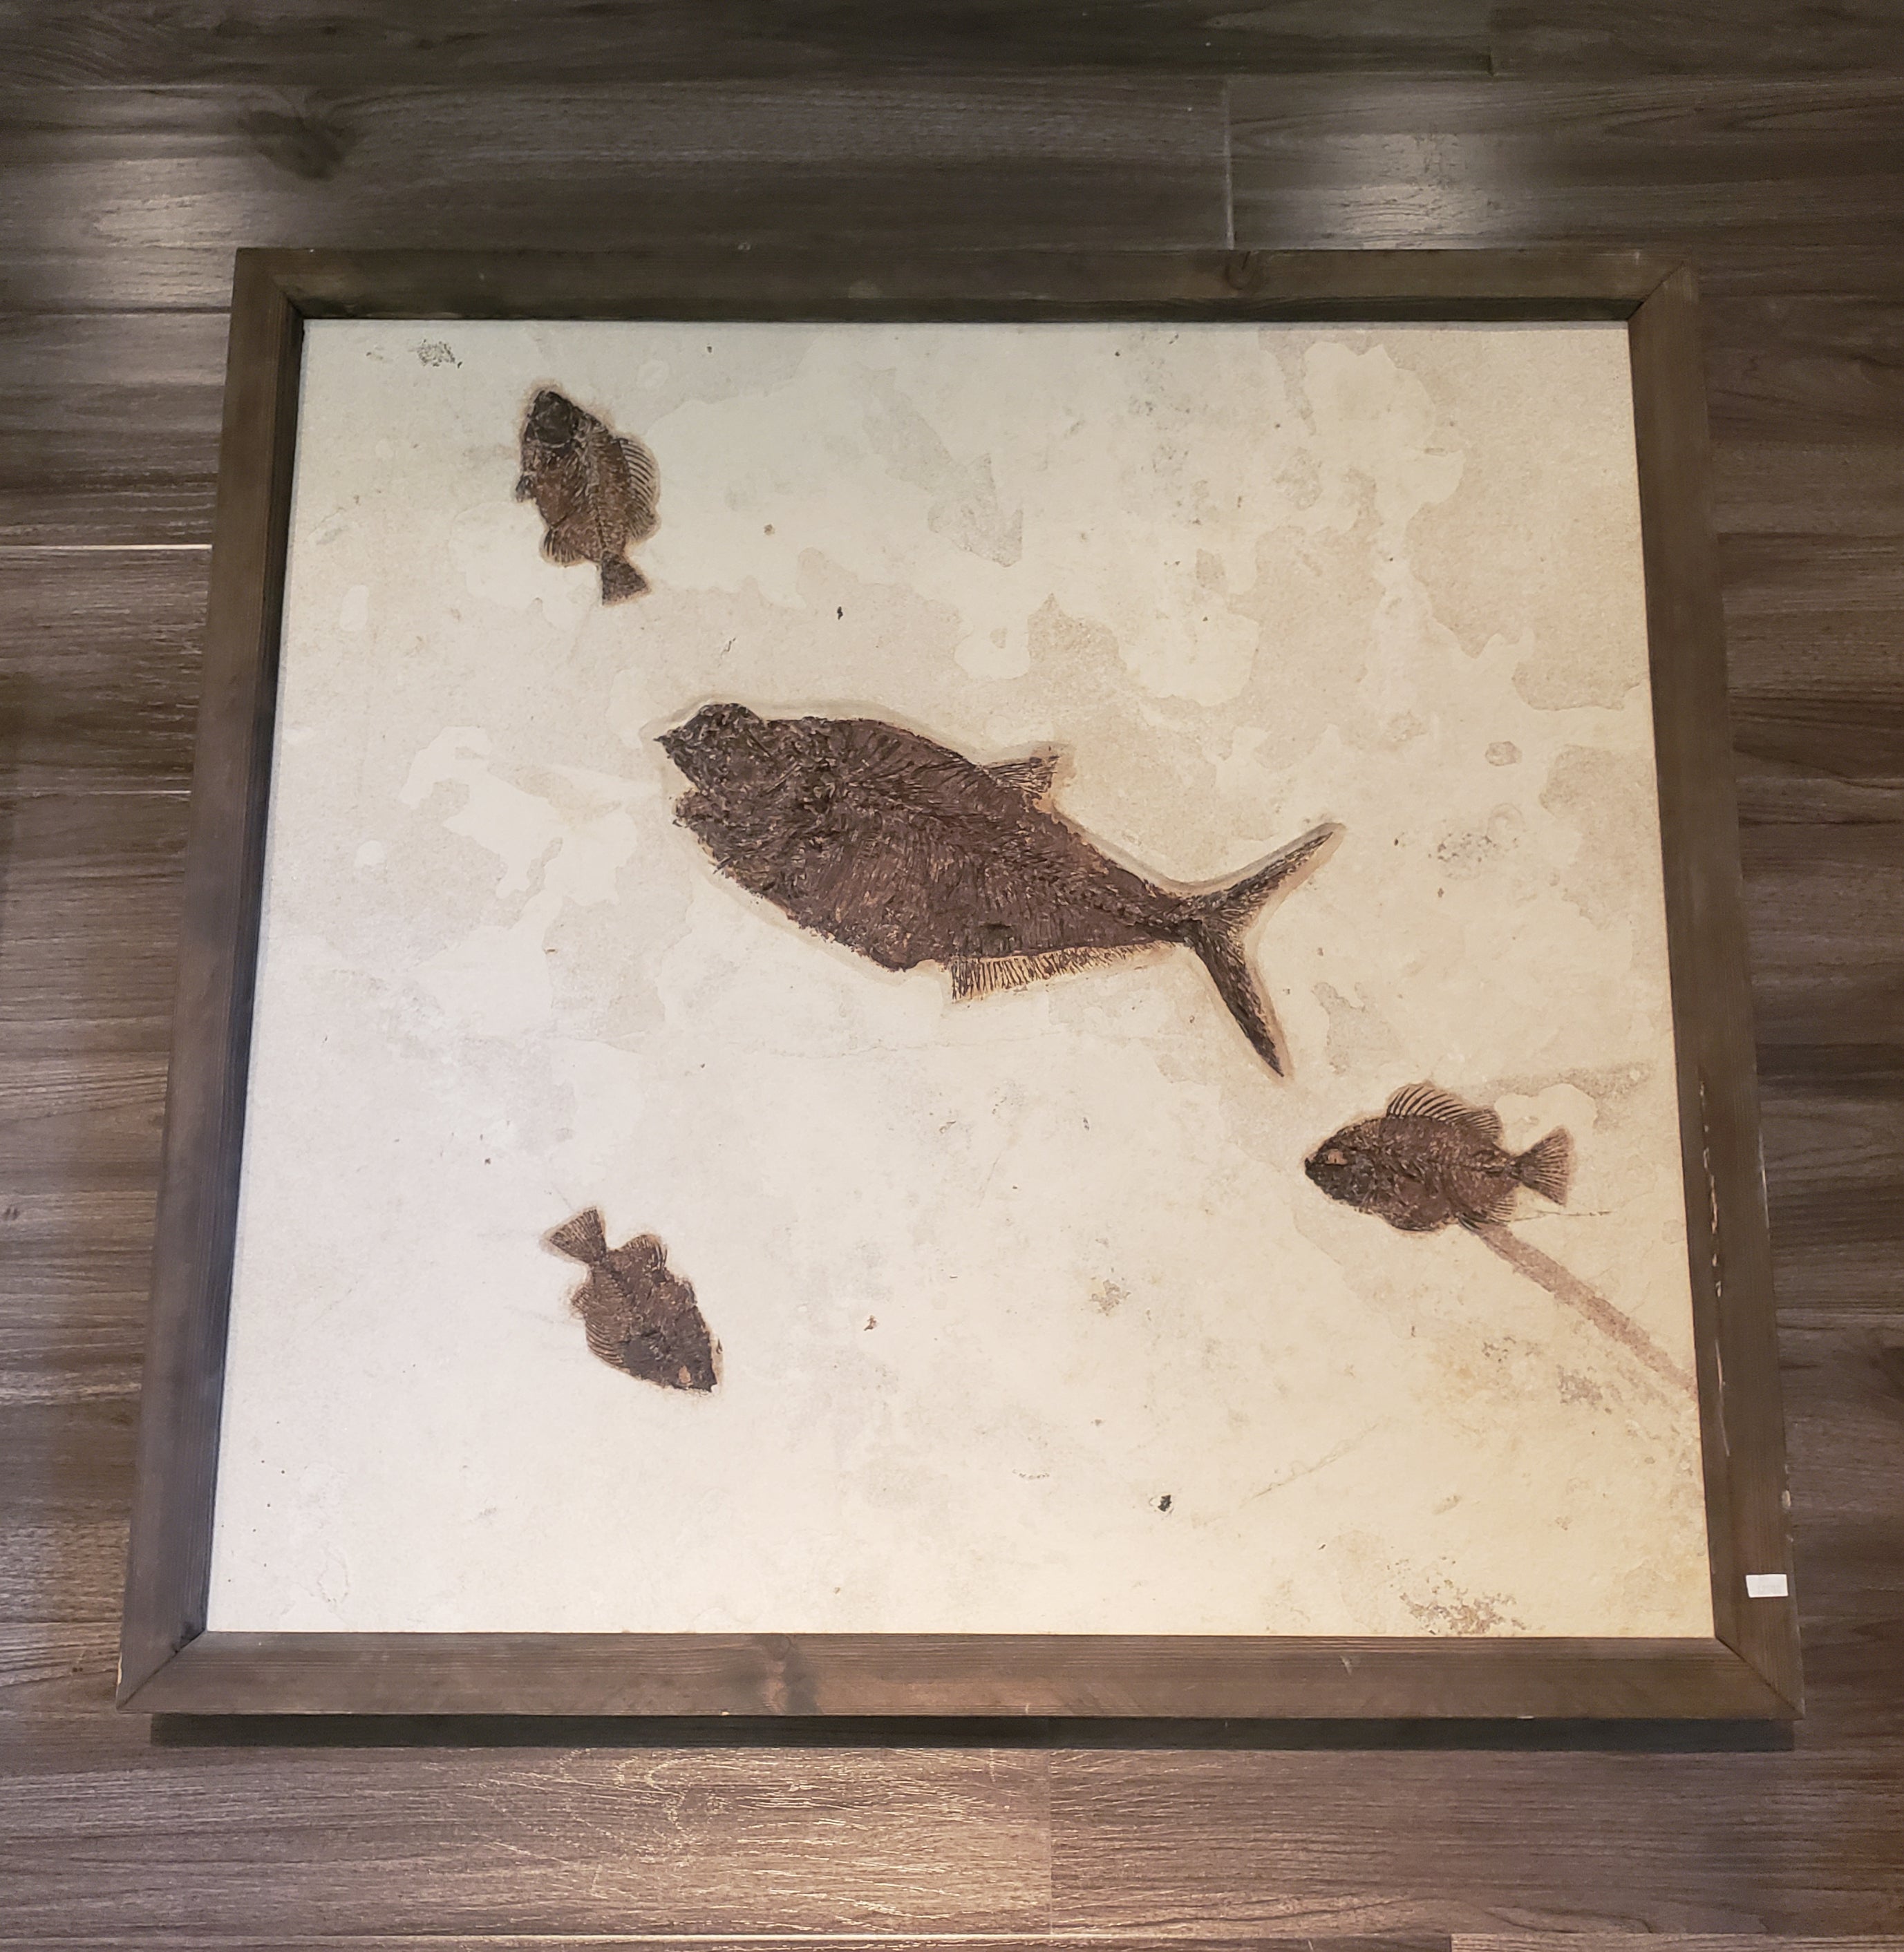 Diplomystus and Priscacara Fish Fossil Plate with Frame